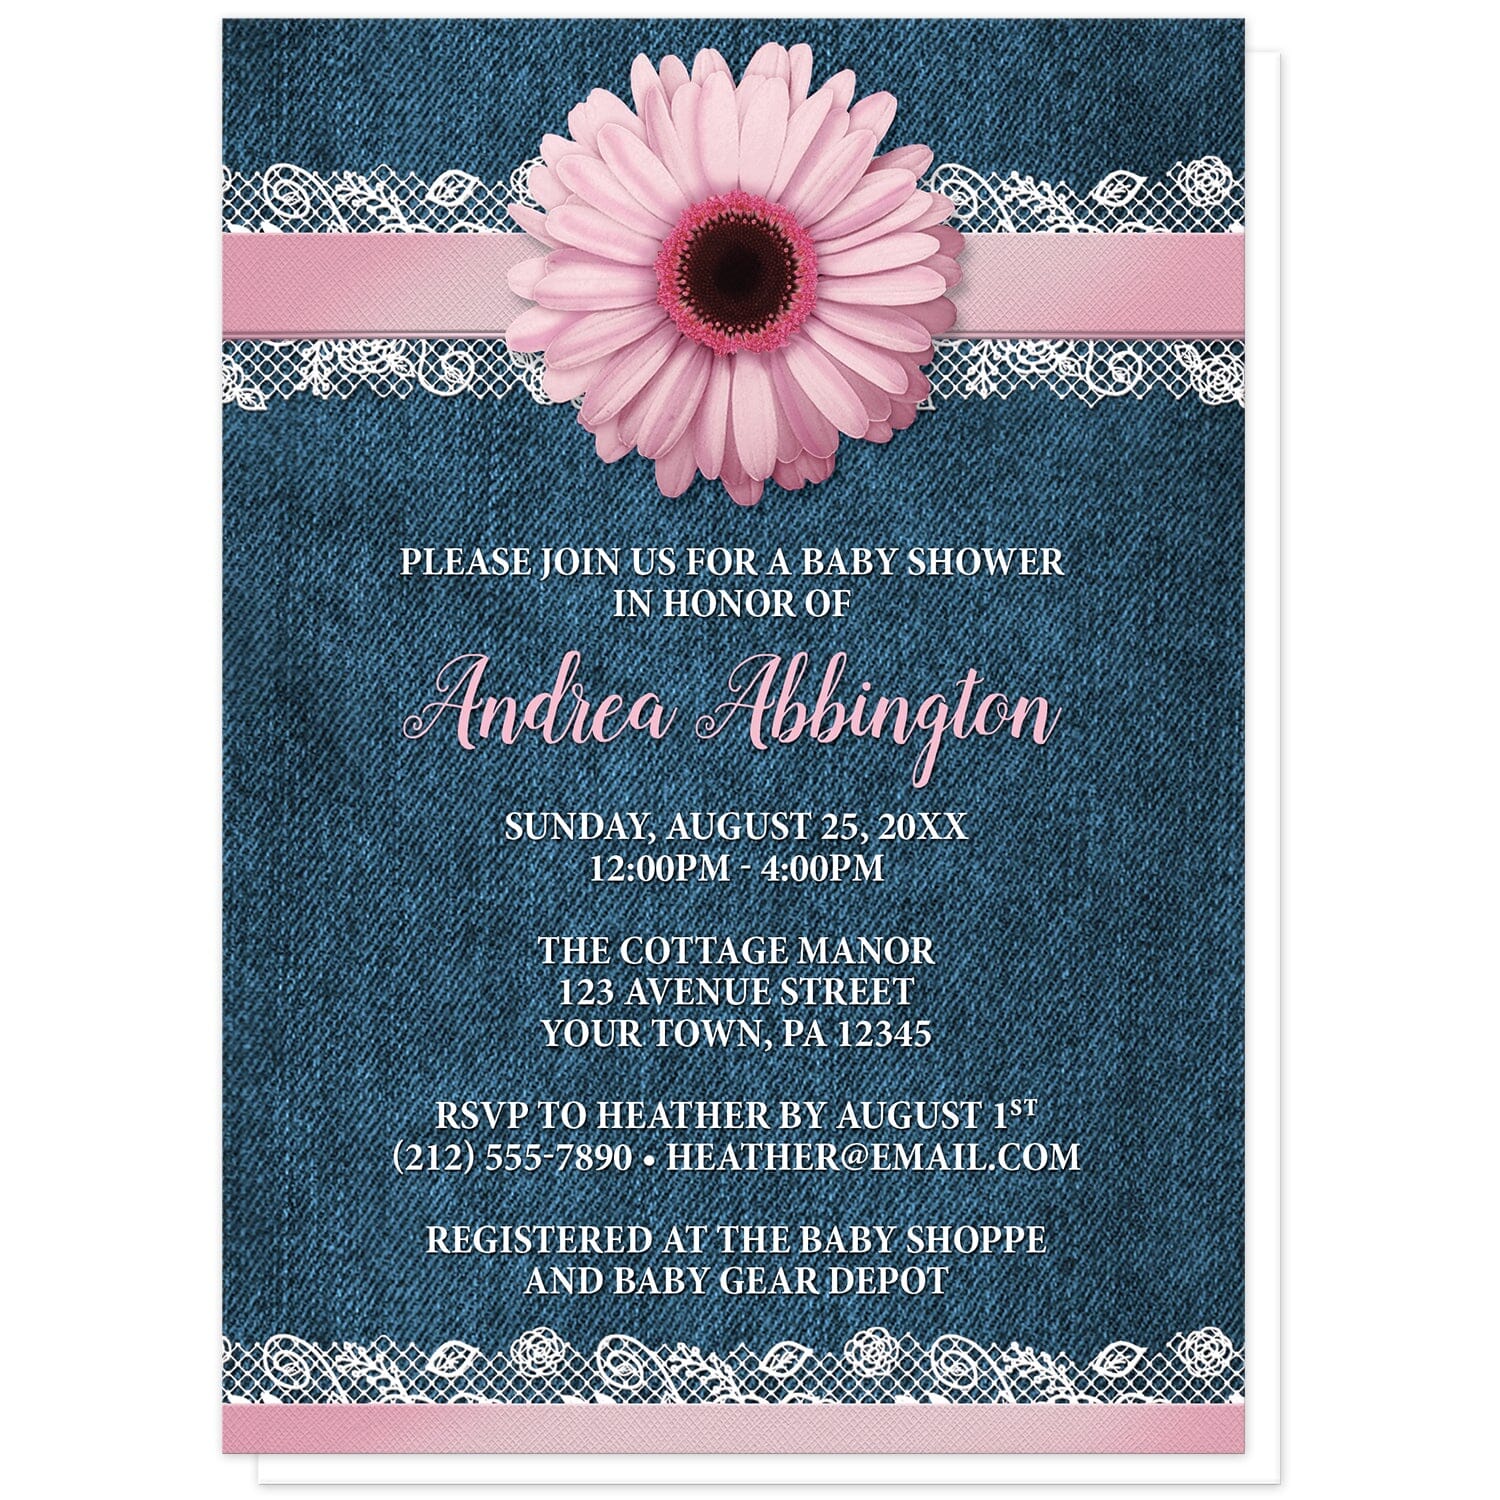 Pink Daisy Lace Rustic Denim Baby Shower Invitations at Artistically Invited. Southern-inspired pink daisy lace rustic denim baby shower invitations with a pink daisy flower image centered at the top on a pink and white lace ribbon illustration. Your personalized baby shower celebration details are custom printed in pink and white over a country blue denim background.